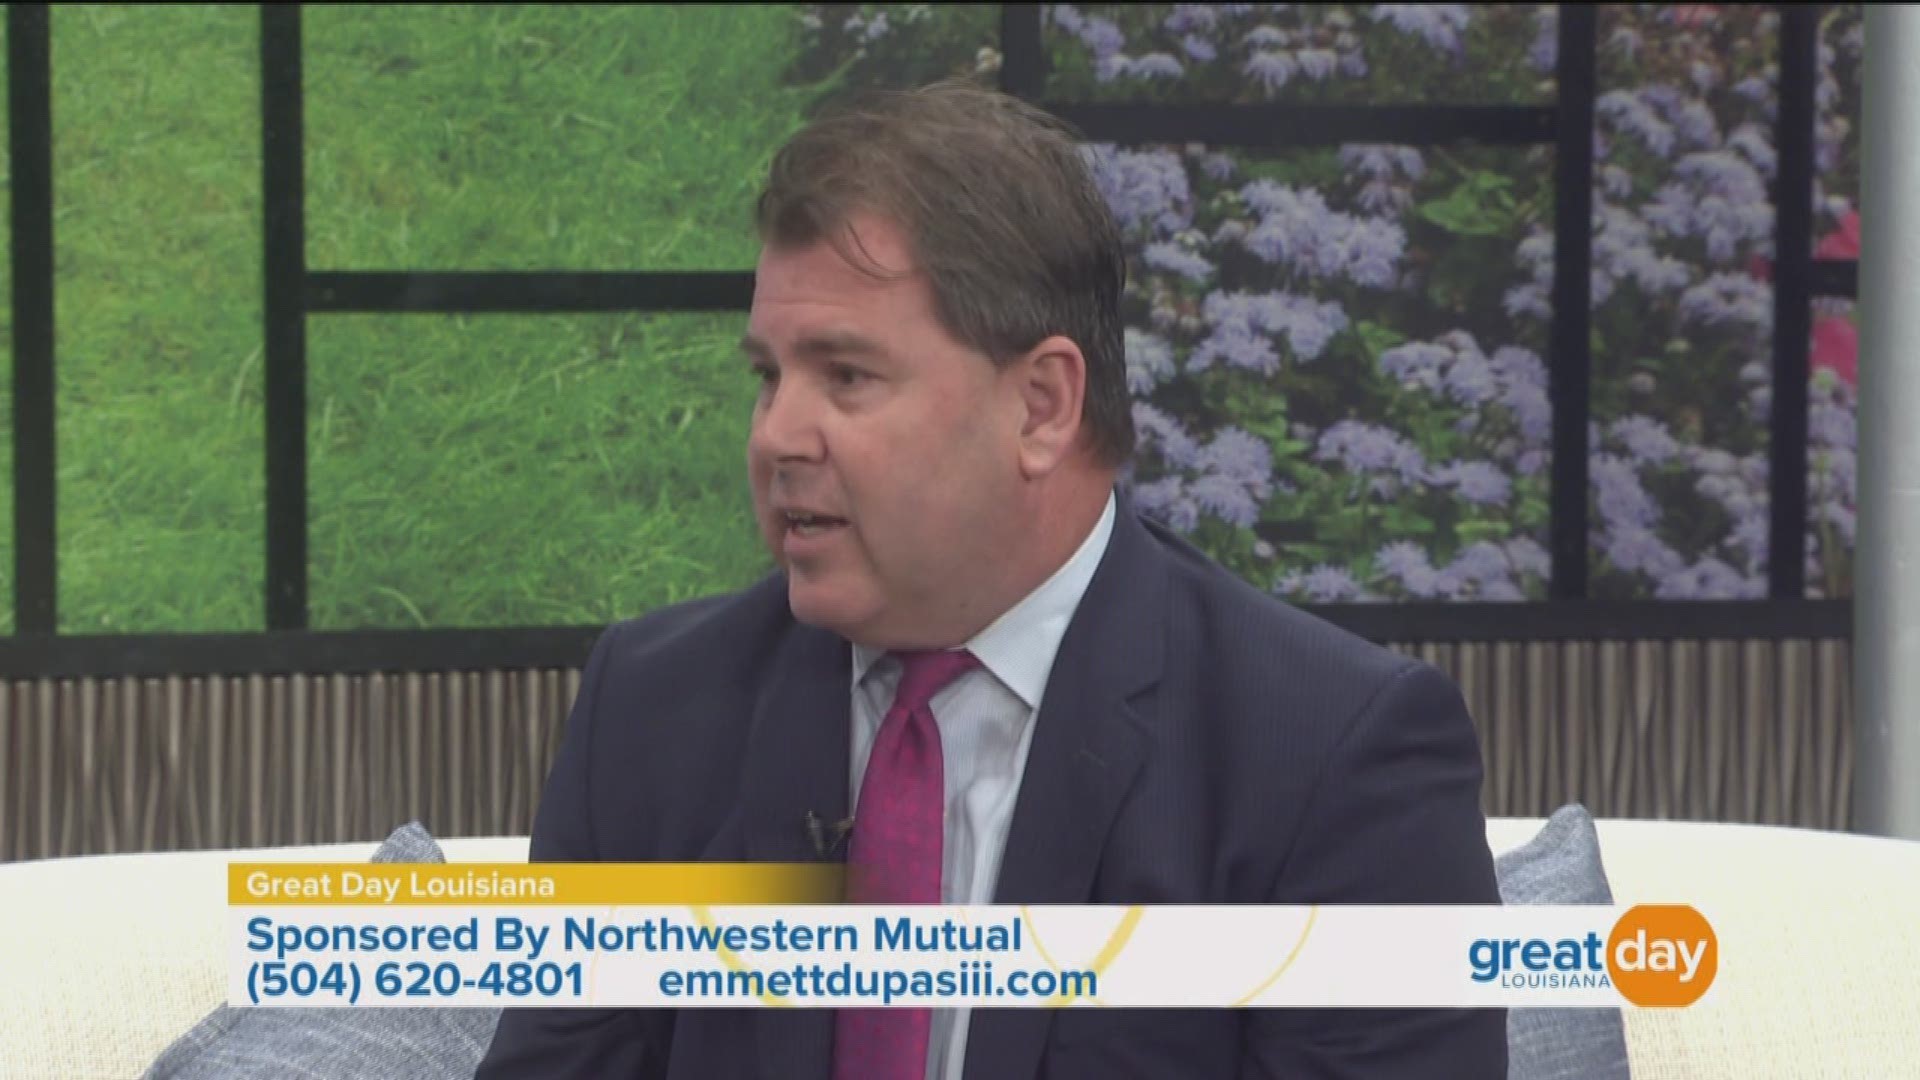 Emmett Dupas III with Northwestern Mutual explains the importance of discussing finances with your soon-to-be spouse when getting married. For more money tips for newlyweds go to emmettdupasiii.com or call 504-620-4801.